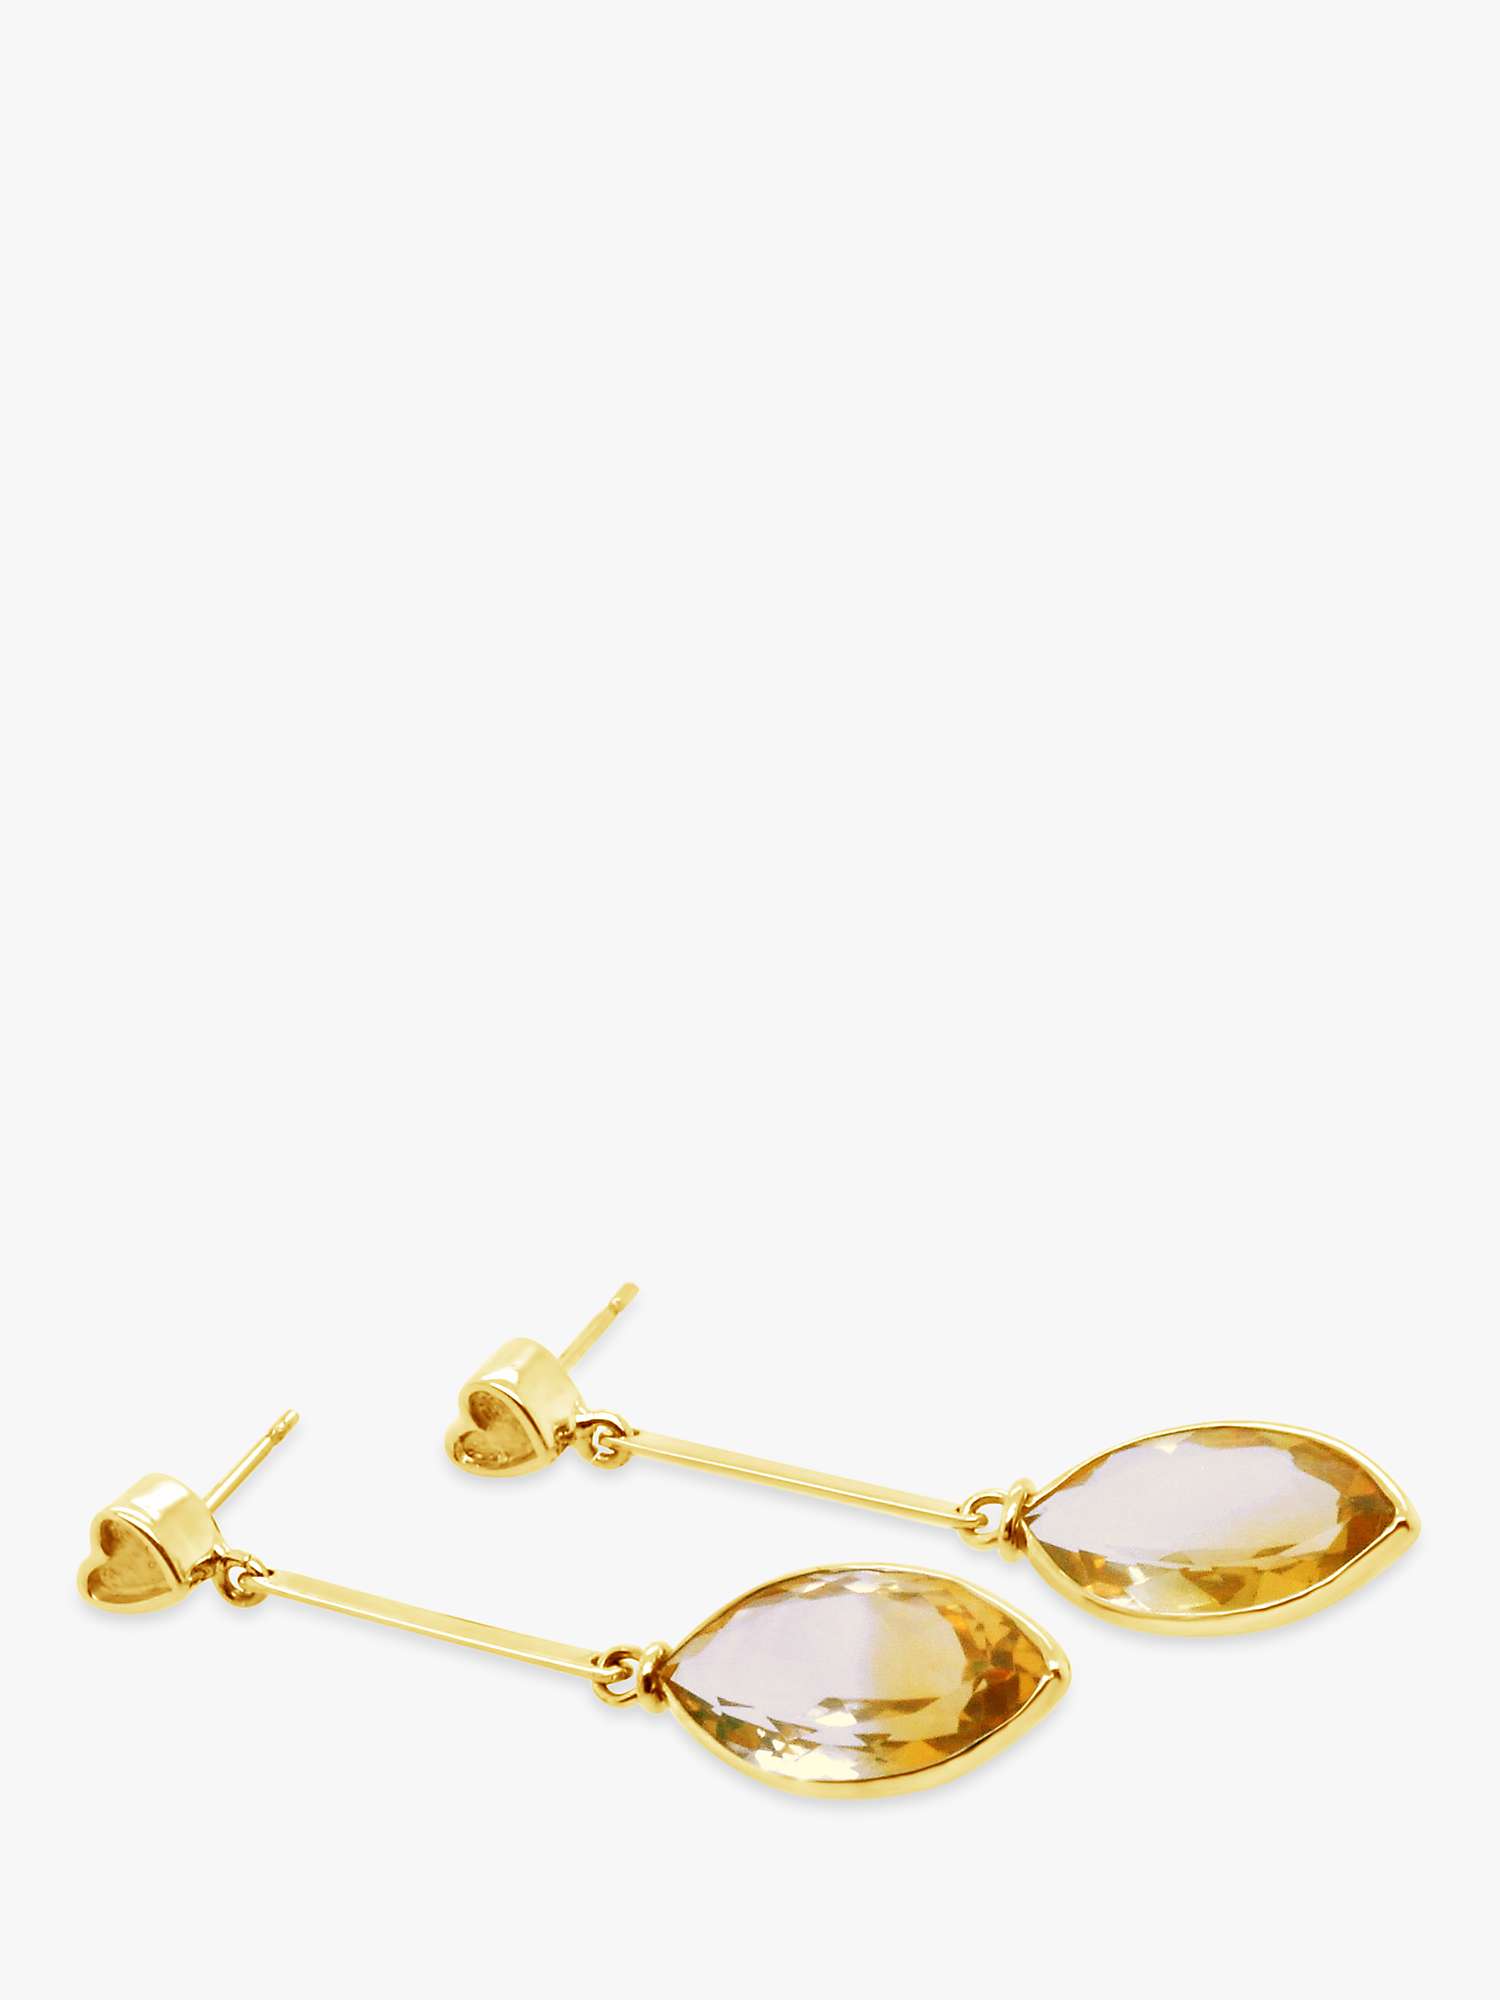 Buy Milton & Humble Jewellery 9ct Gold Second Hand Citrine Drop Earrings Online at johnlewis.com